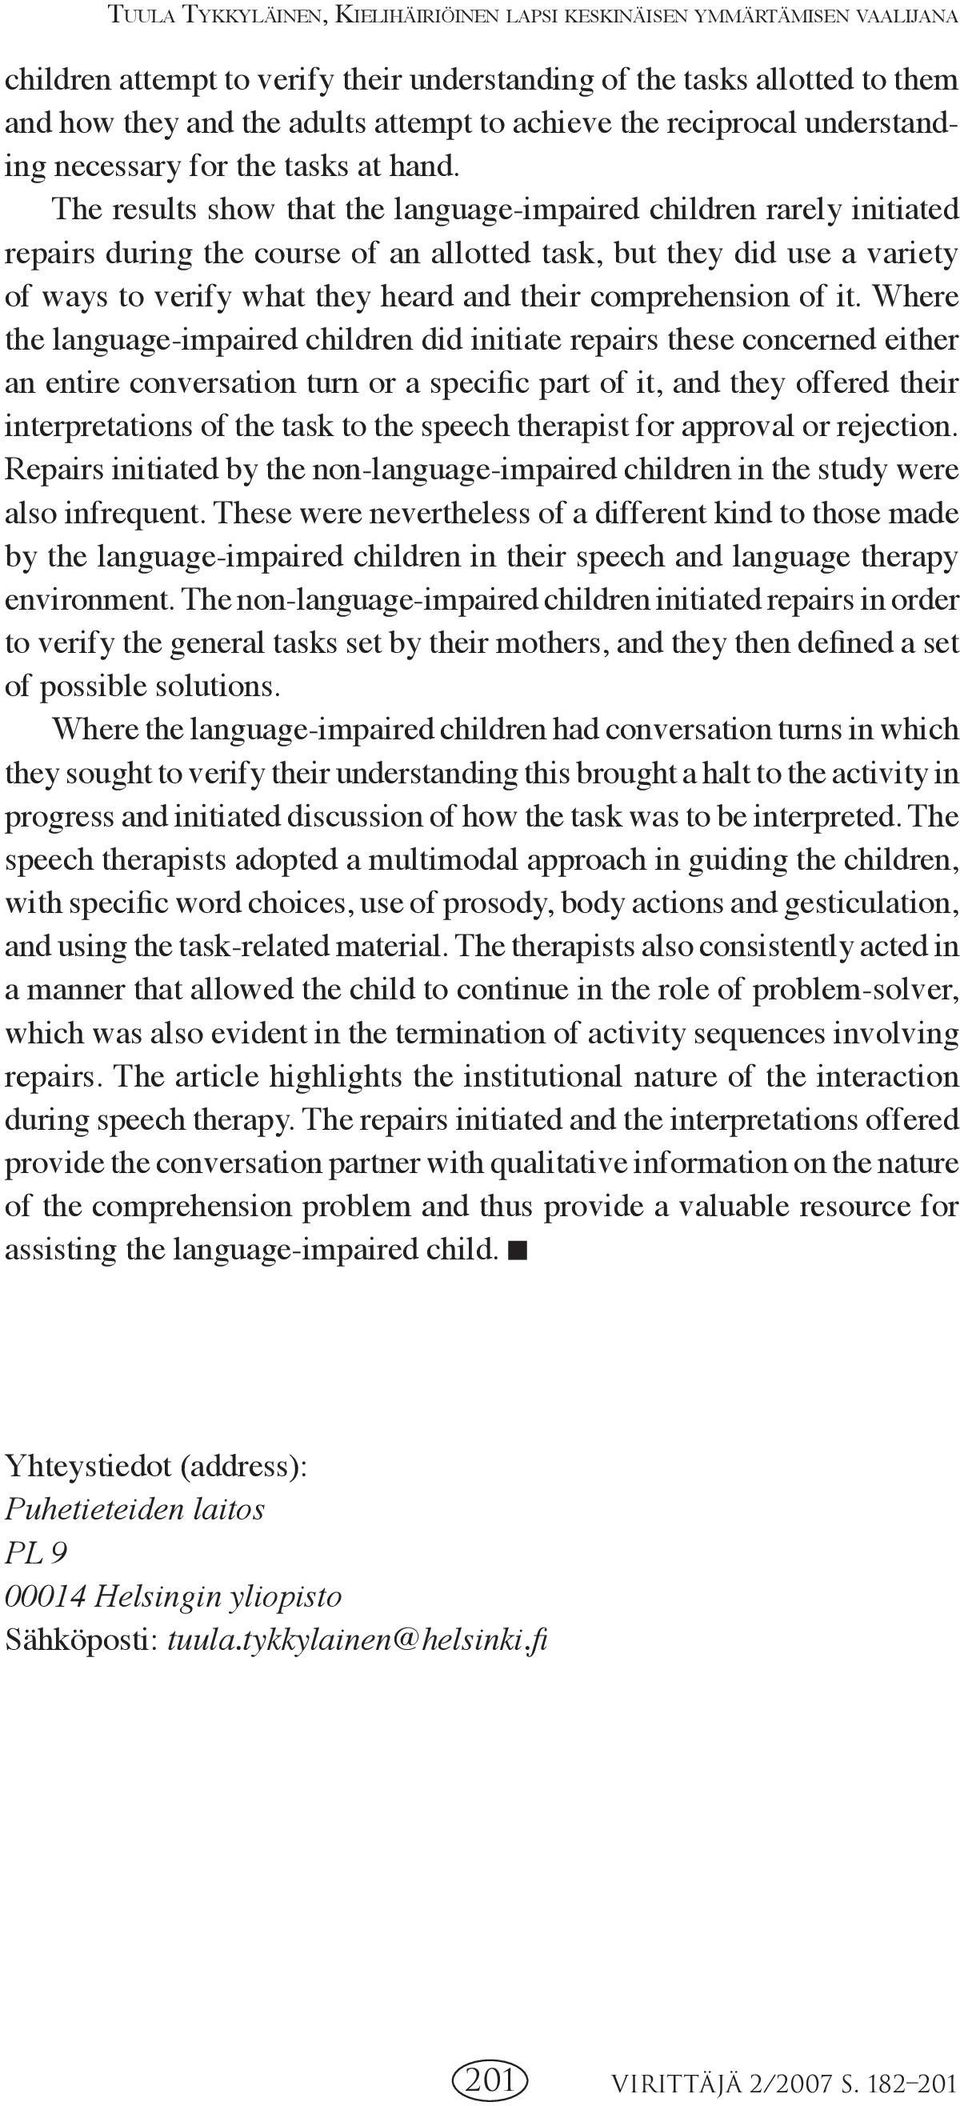 The results show that the language-impaired children rarely initiated repairs during the course of an allotted task, but they did use a variety of ways to verify what they heard and their